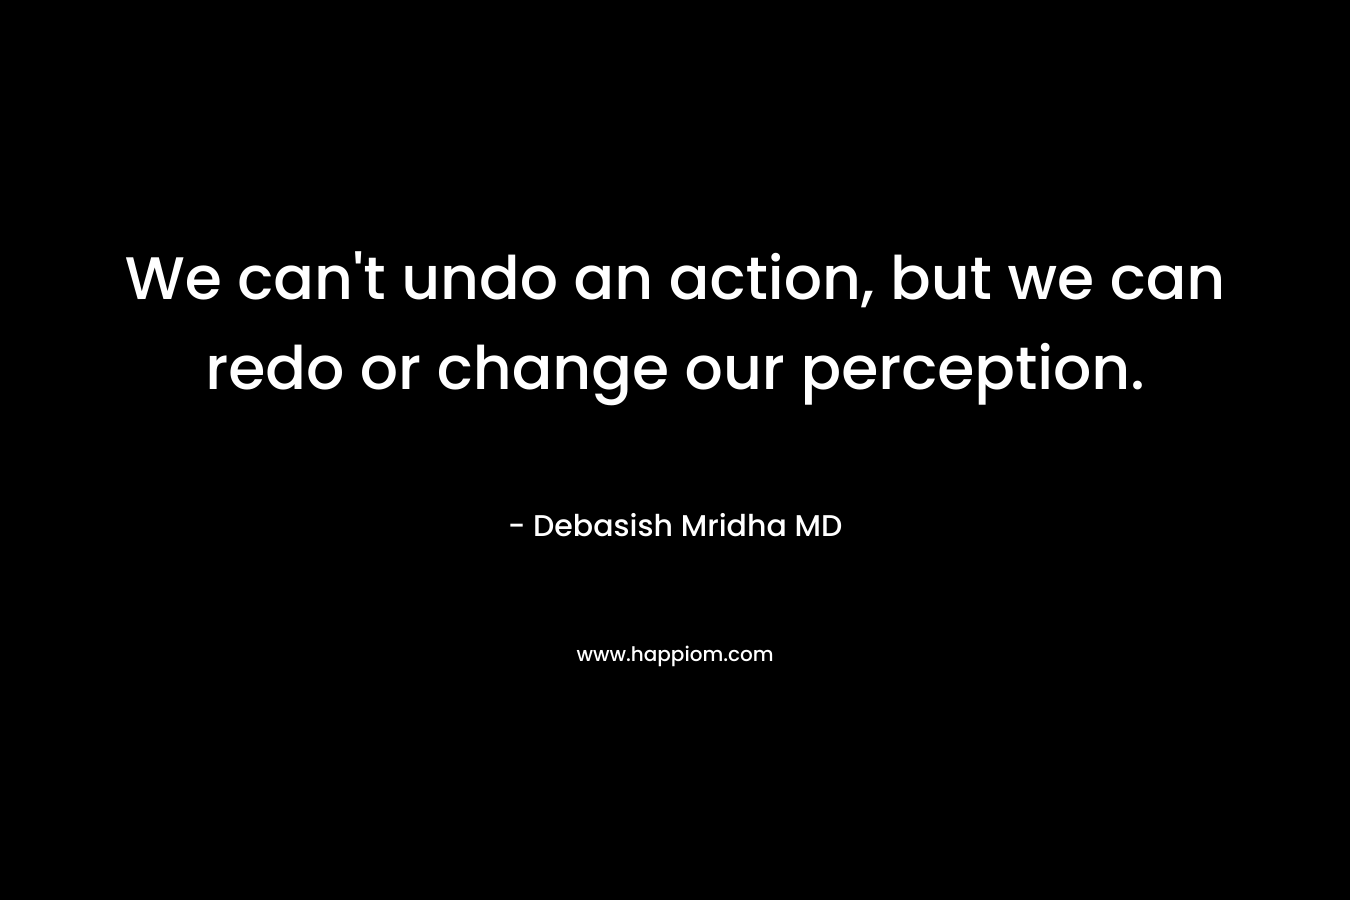 We can't undo an action, but we can redo or change our perception.